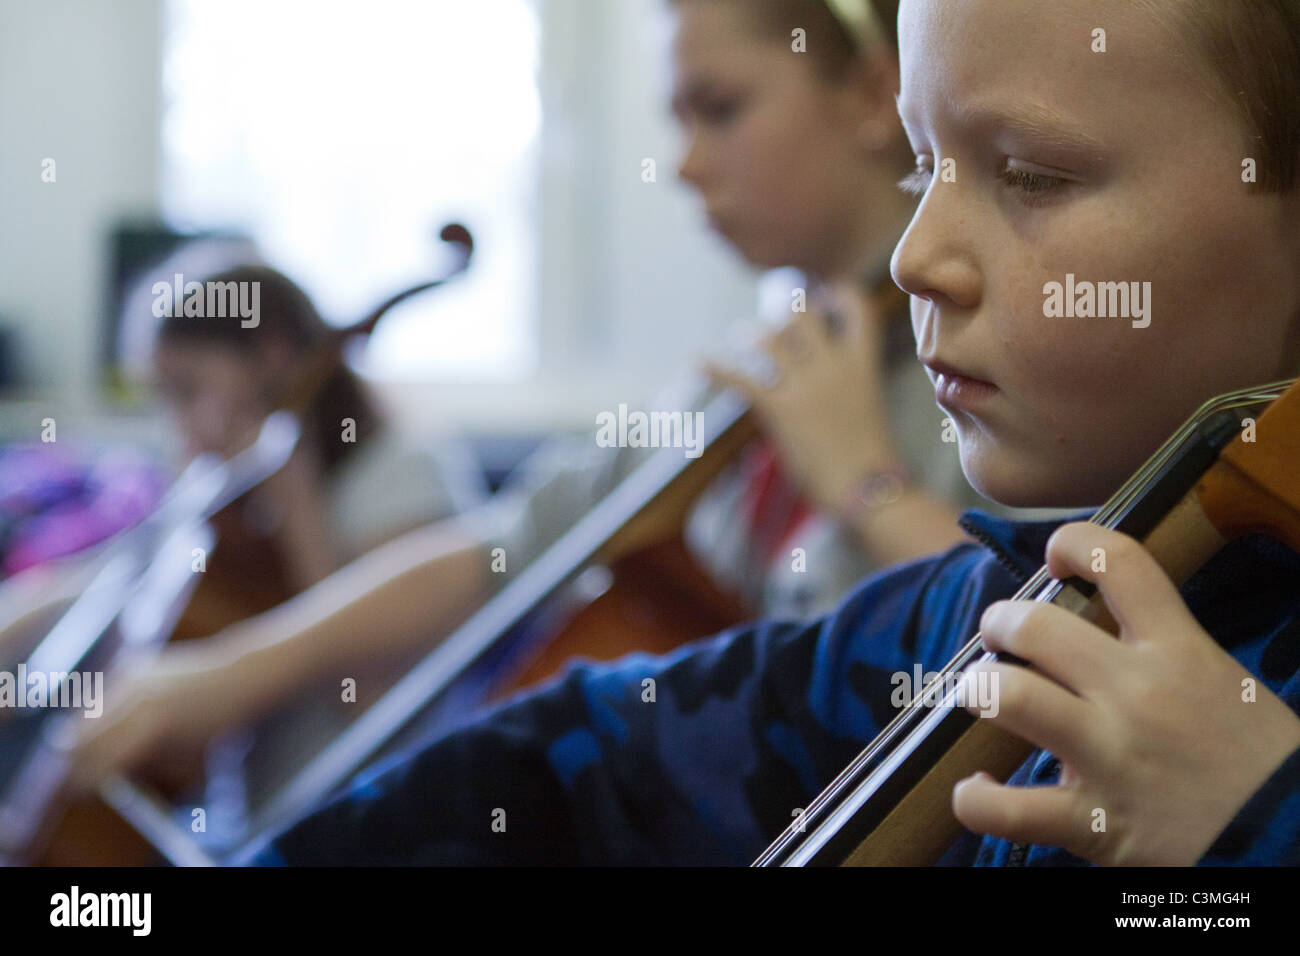 Young cellists playing their cellos in a youth music group / orchestra / band Stock Photo